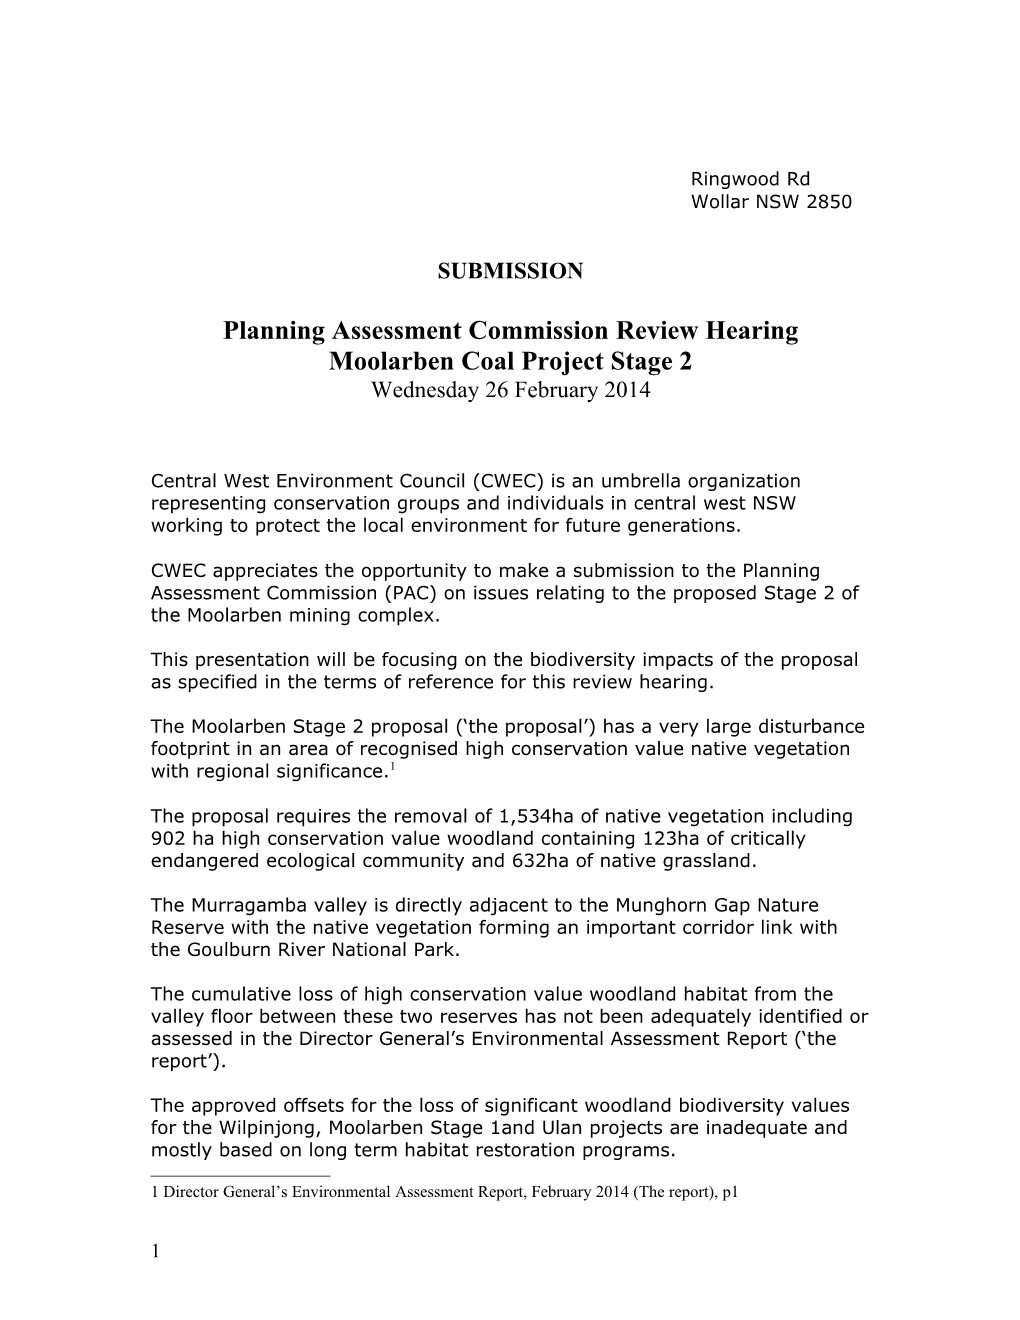 Planning Assessment Commission Review Hearing